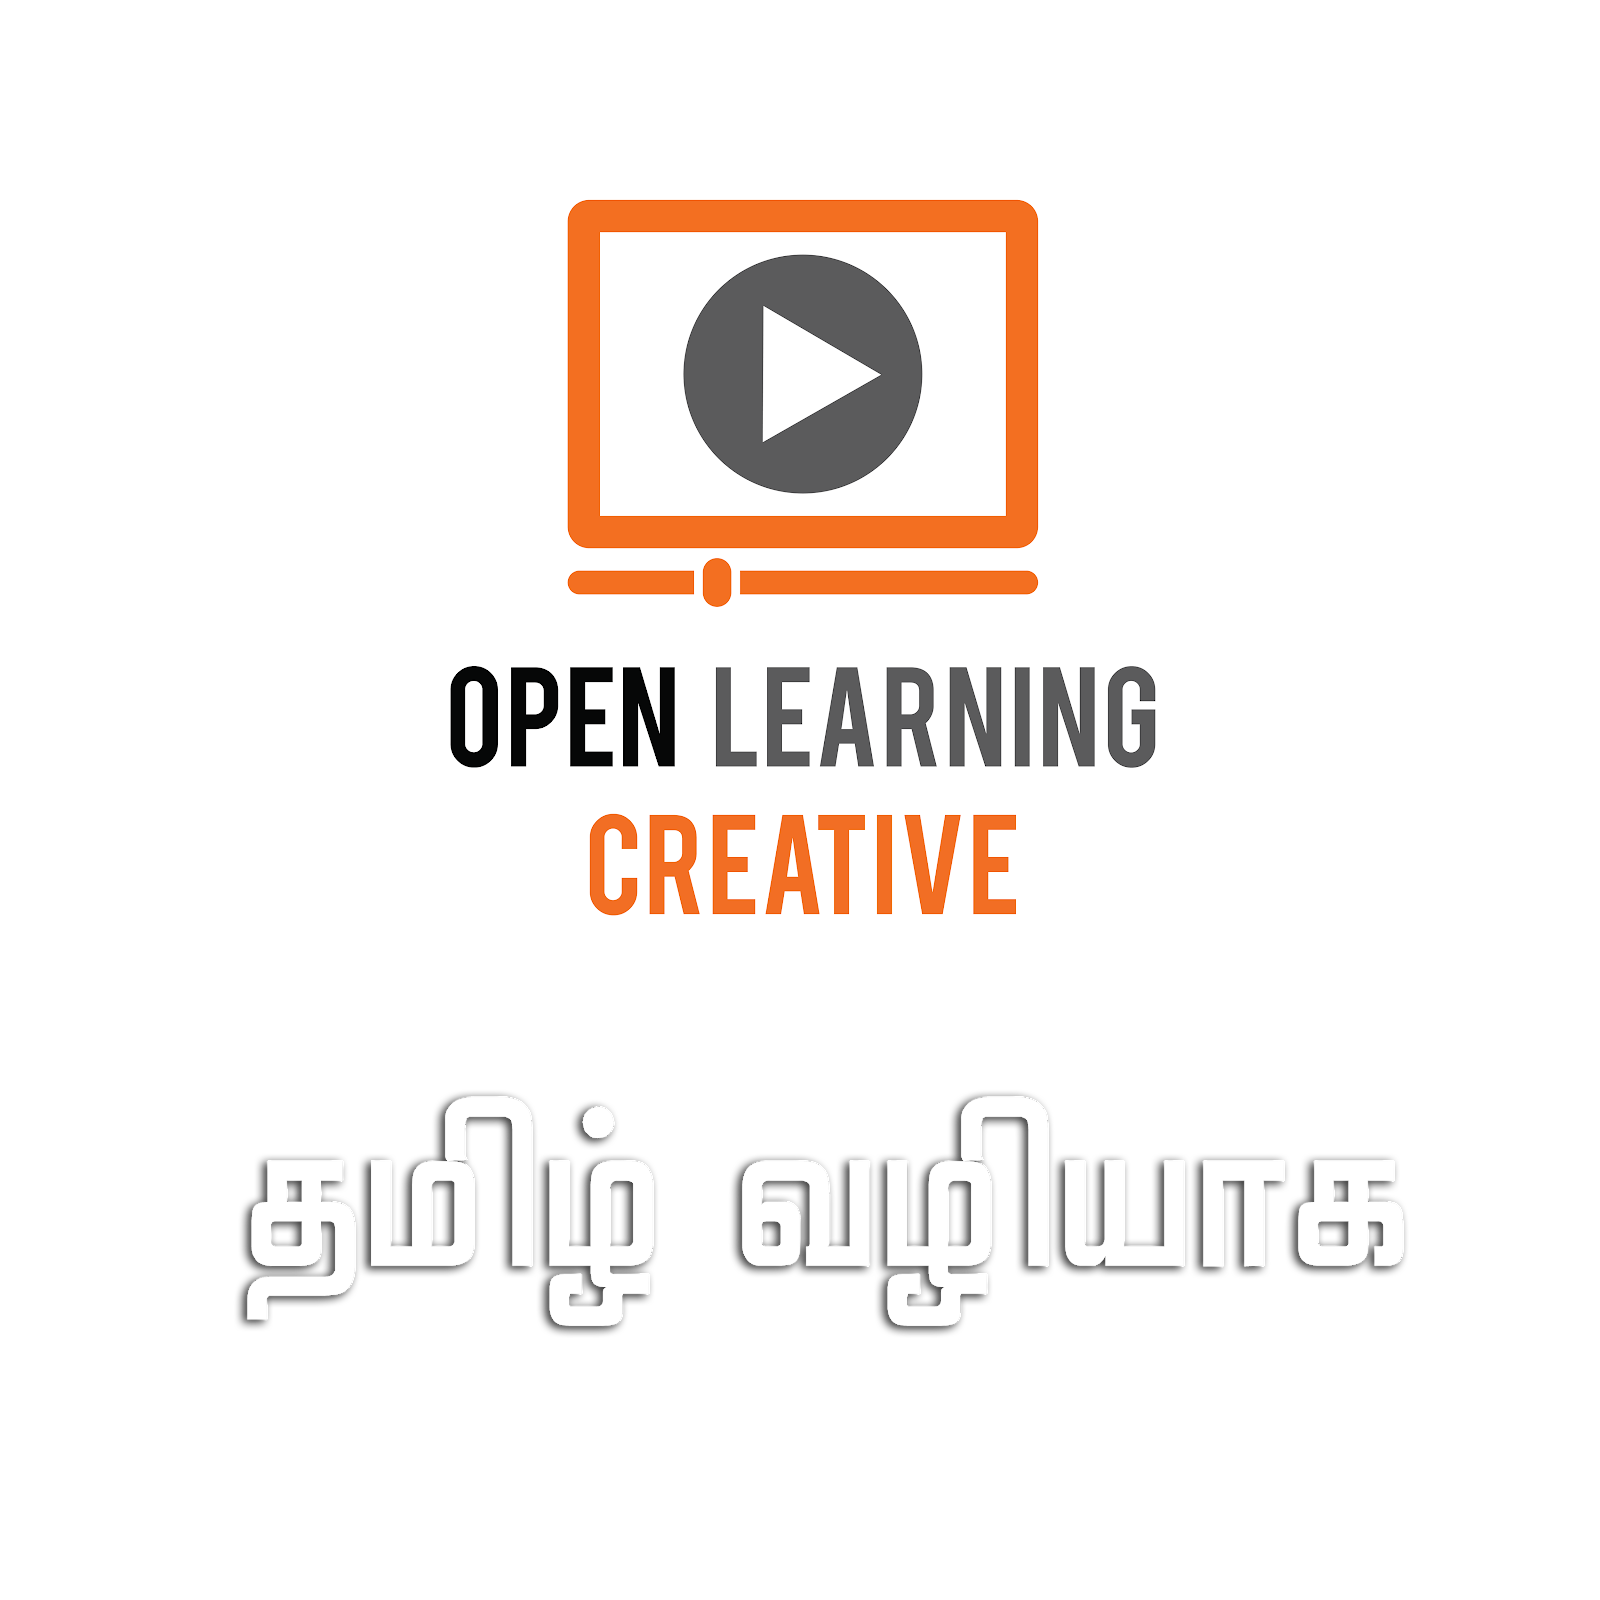 Open Learning Creative